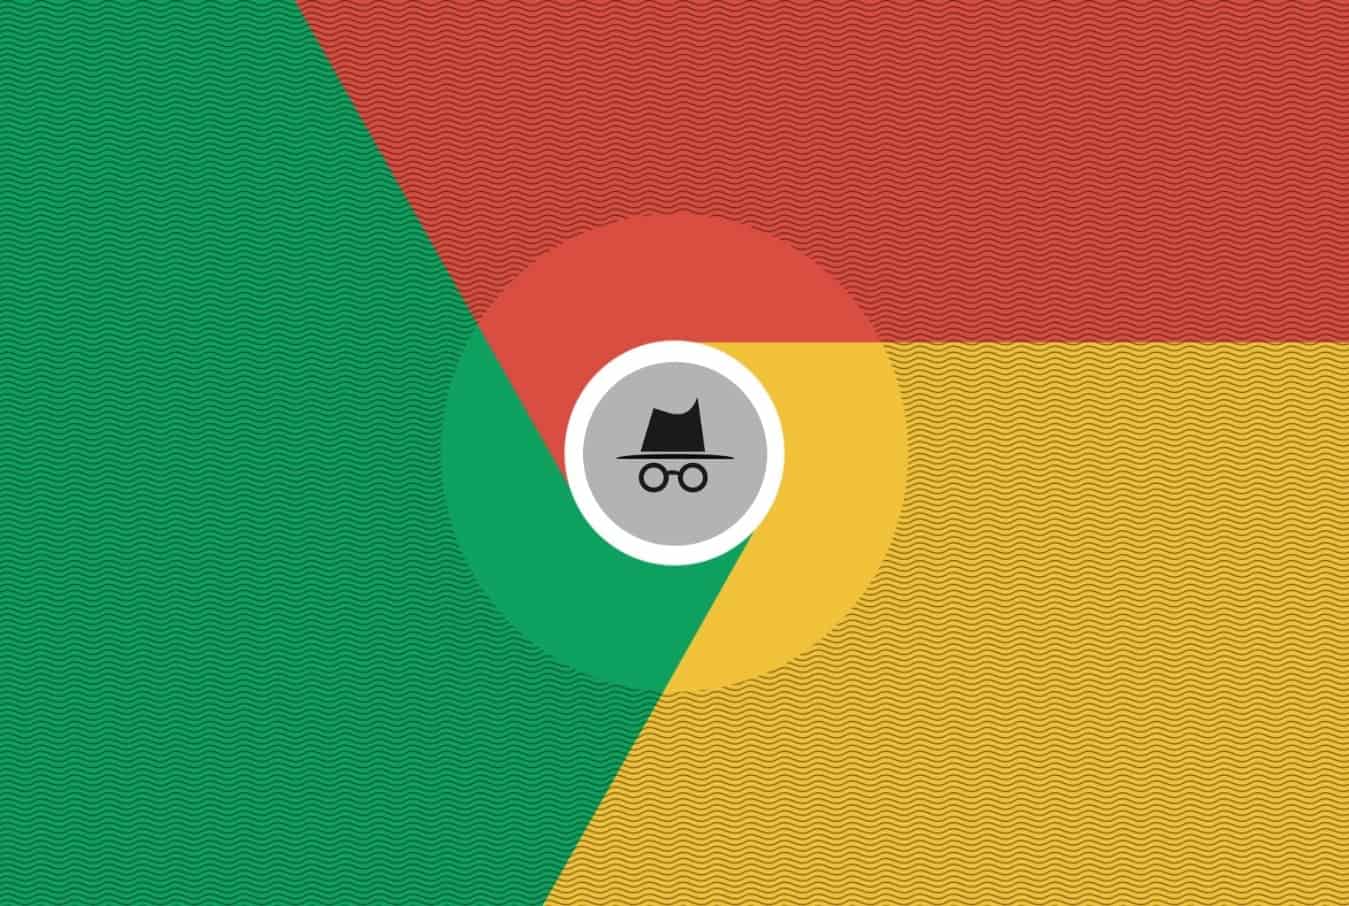 Lawsuit claims Google tracks browsing activities even in Incognito mode